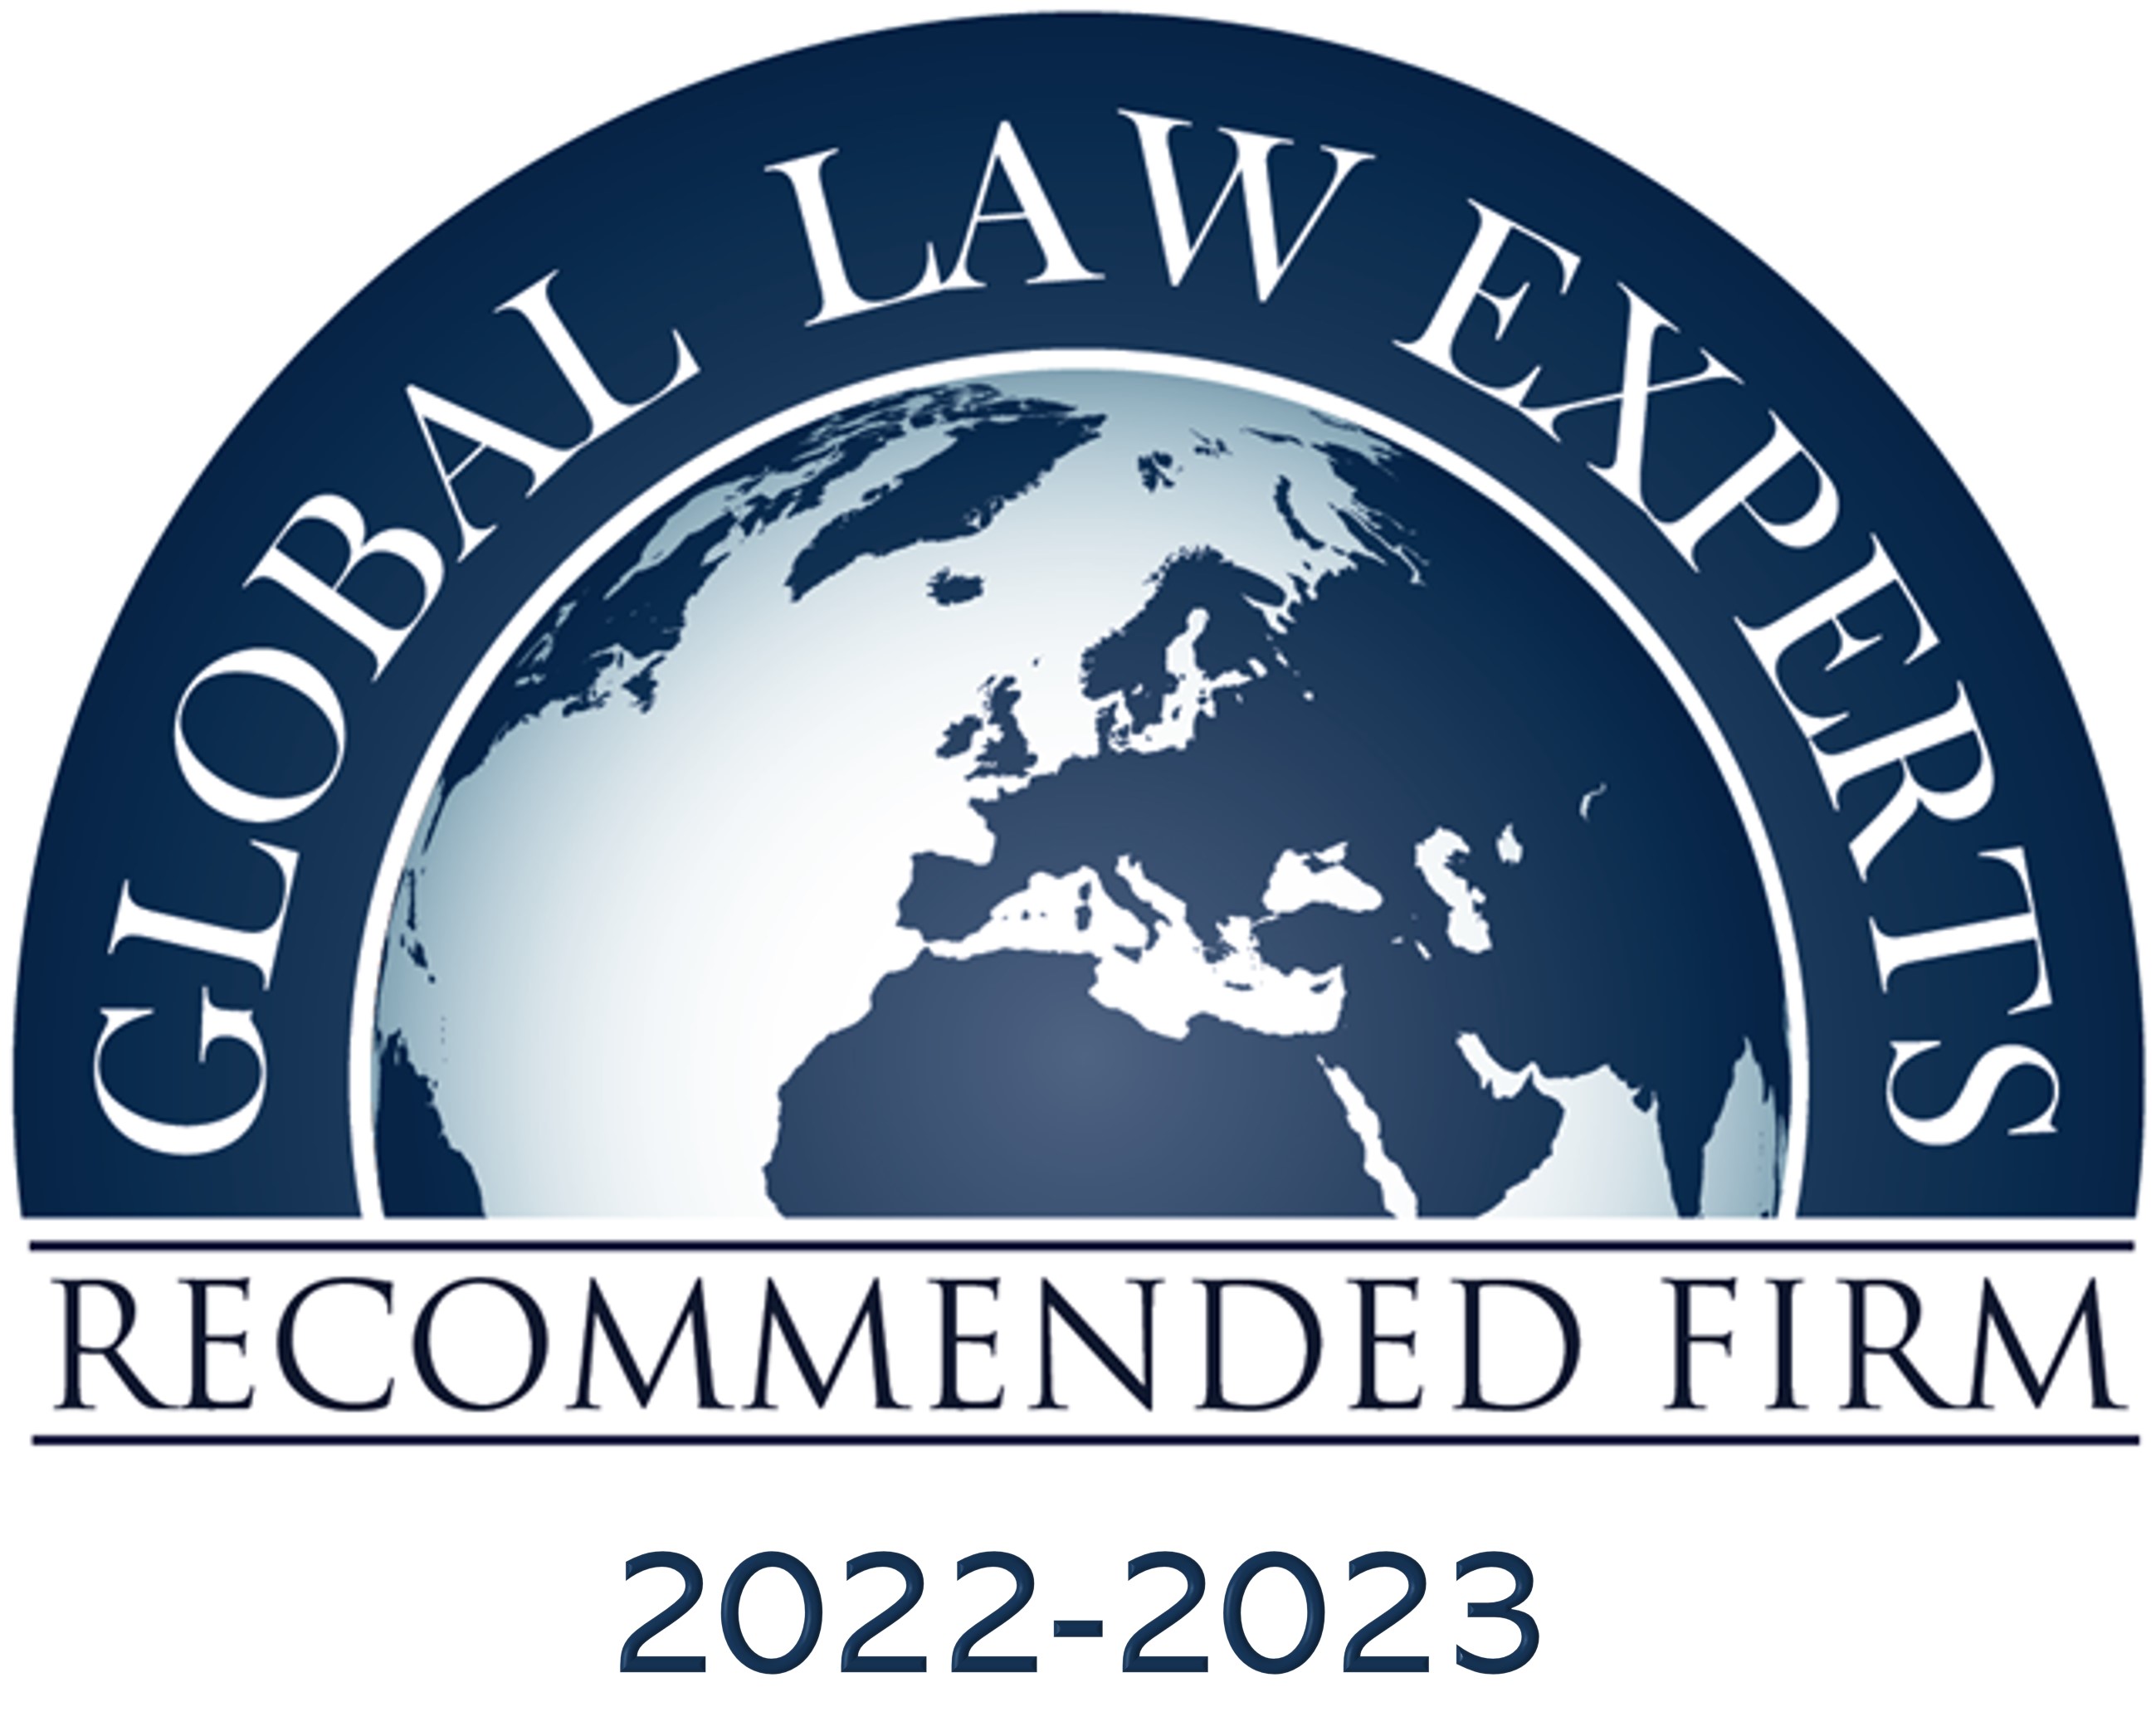 Named as an exclusive "Recommended M&A Firm" in Hong Kong by Global Law Experts (GLE) 2022/2023